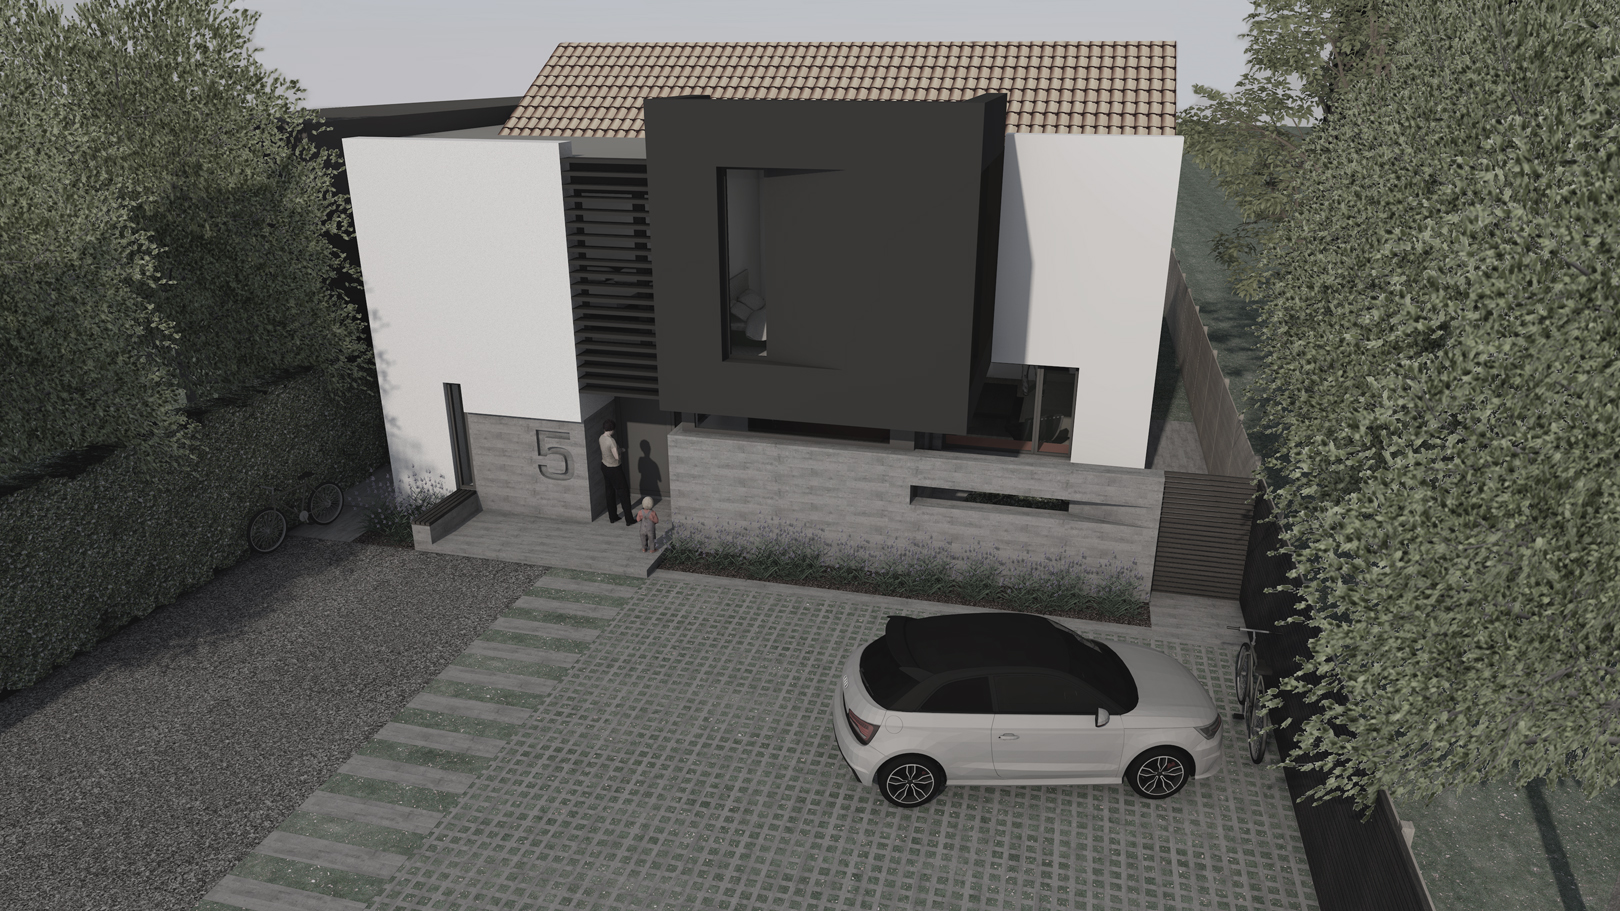 5 Andover Road  p12 rear planning  - Picture10.jpg